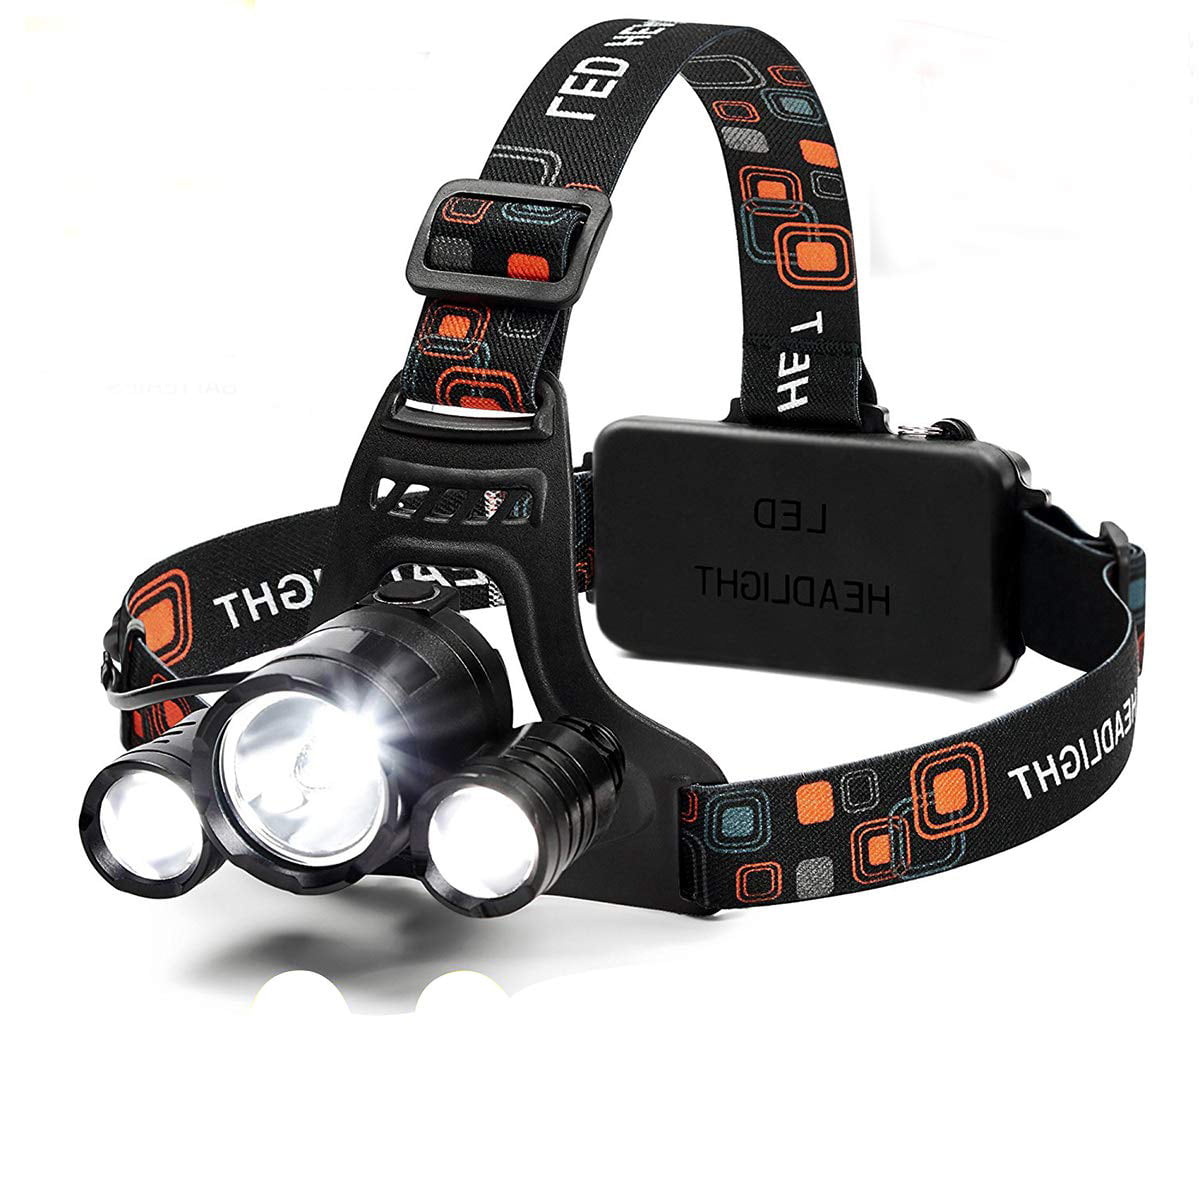 Nitefox Magnetic Flashlight Headlamp Magnetic USB Rechargeable 2000 Lumens High Bright Outdoor Headlamp for Outdoor Hiking,Hunting,Fishing,Camping MC1 for 18350 CR123 